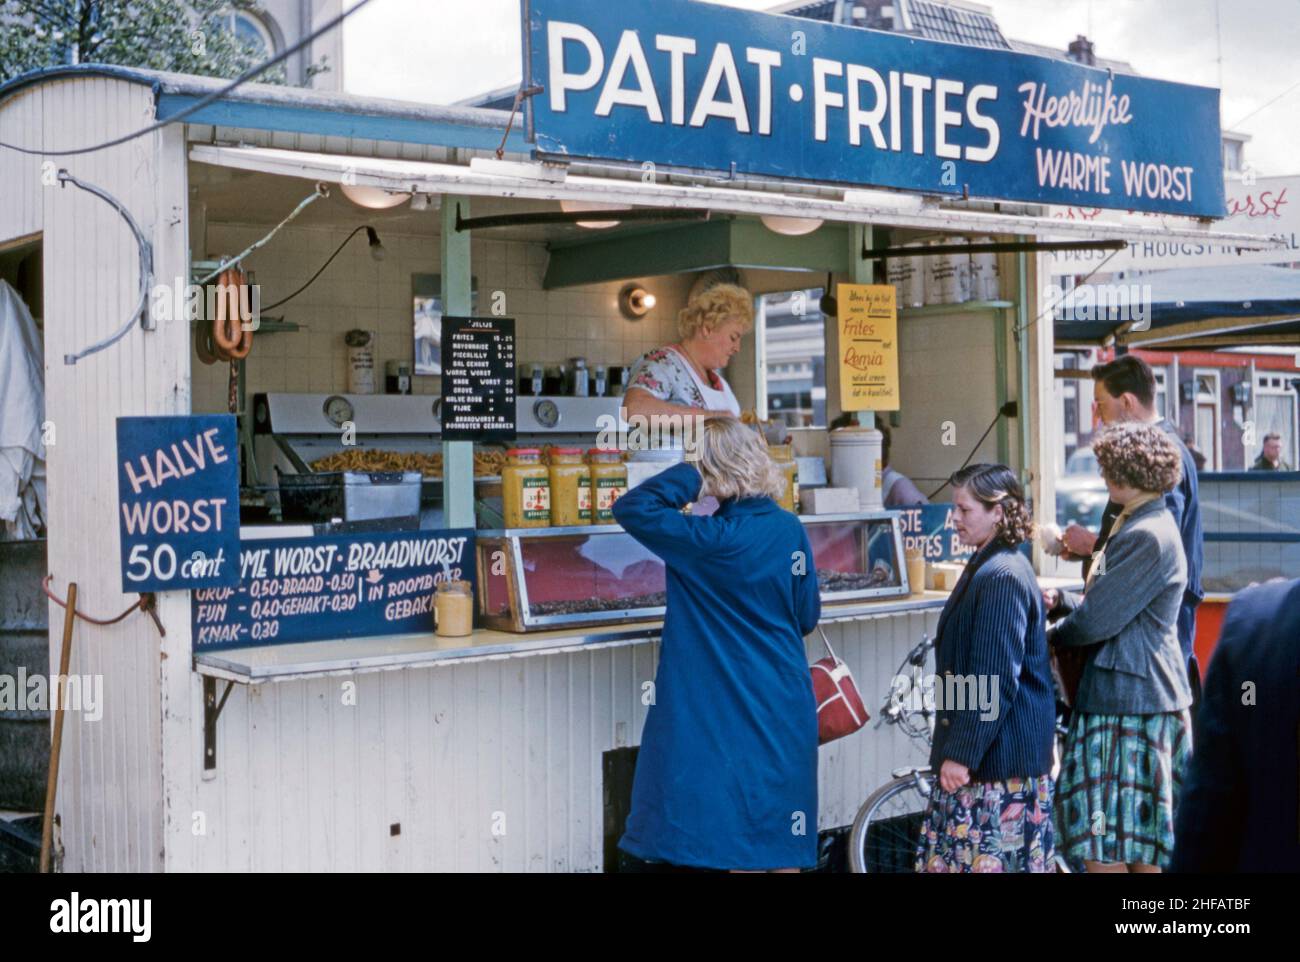 A fast food, takeaway market stall selling delicious (‘heerlijke’) sausage and chips (worst and patat) in the centre of Apeldoorn, Gelderland, the Netherlands c. 1960. This image is from an amateur Kodak 35mm colour transparency – a vintage 1950s/1960s photograph. Stock Photo